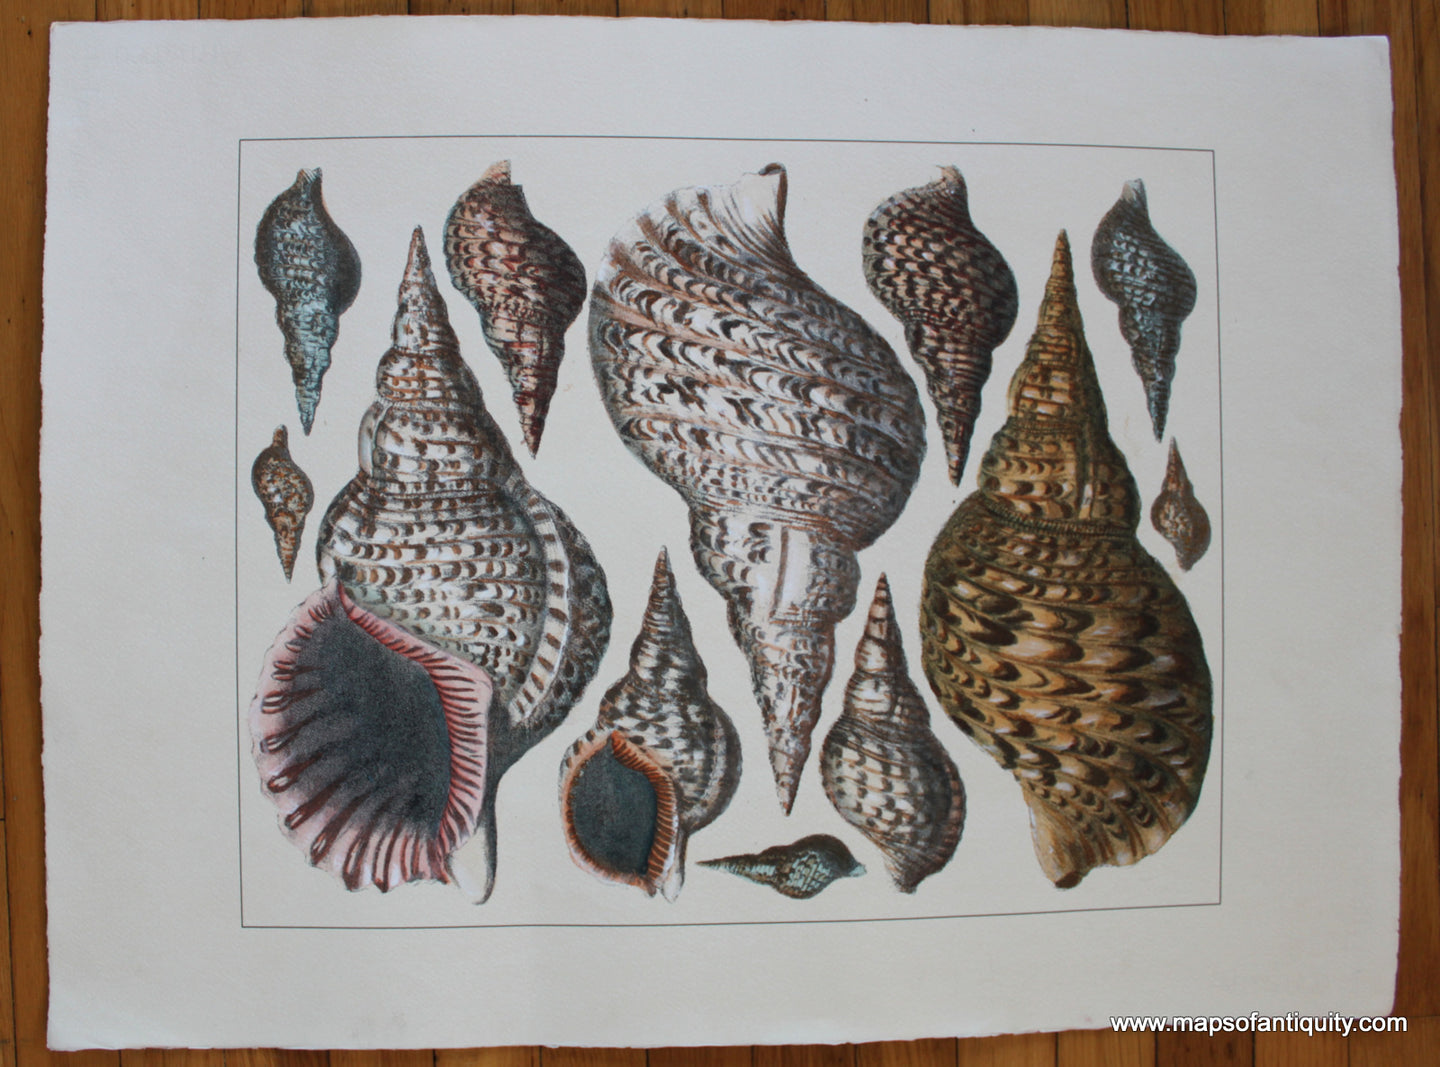 Specialty-Reproduction-Shells-(Reproduction)-Digitally-Engraved-Specialty-Reproduction---Reproduction-Maps-Of-Antiquity